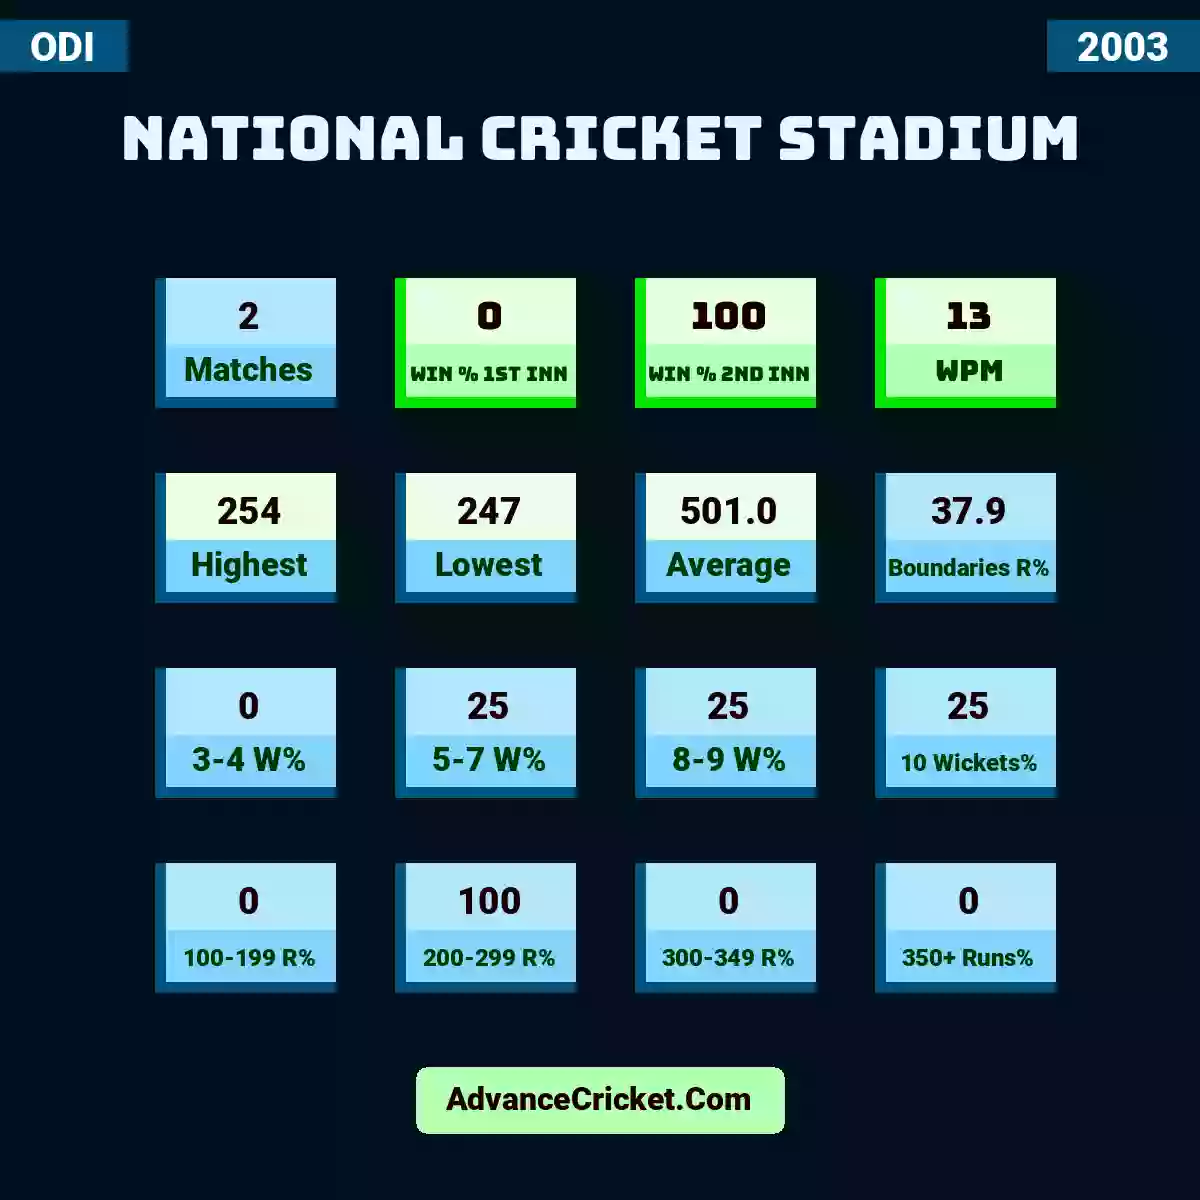 Image showing National Cricket Stadium with Matches: 2, Win % 1st Inn: 0, Win % 2nd Inn: 100, WPM: 13, Highest: 254, Lowest: 247, Average: 501.0, Boundaries R%: 37.9, 3-4 W%: 0, 5-7 W%: 25, 8-9 W%: 25, 10 Wickets%: 25, 100-199 R%: 0, 200-299 R%: 100, 300-349 R%: 0, 350+ Runs%: 0.